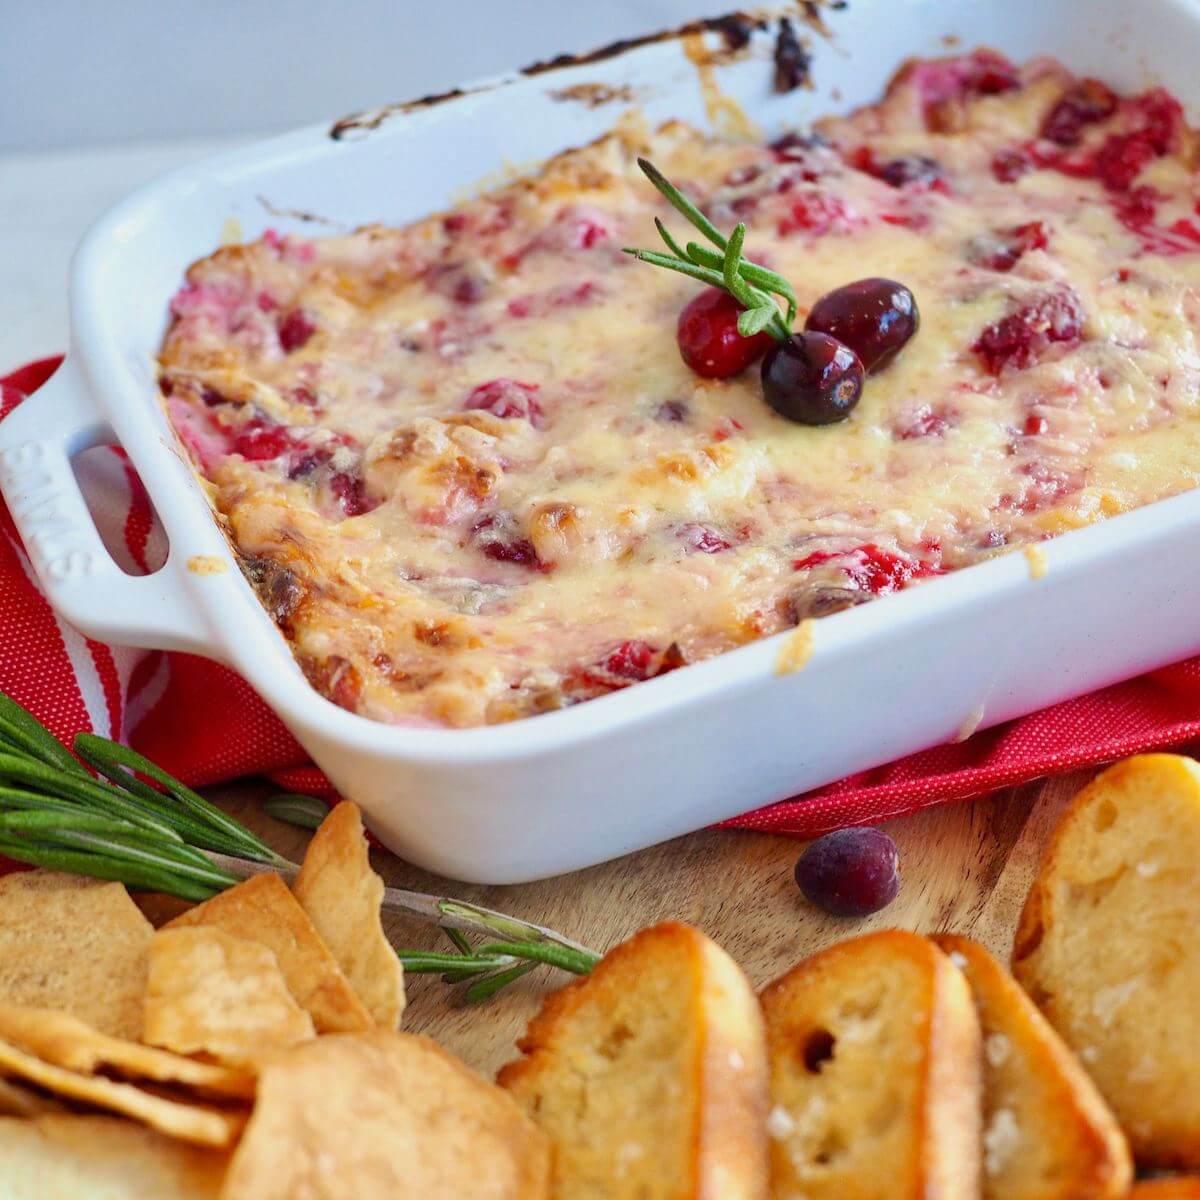 Hot and cheesy, cranberry cream cheese dip with white cheddar cheese.